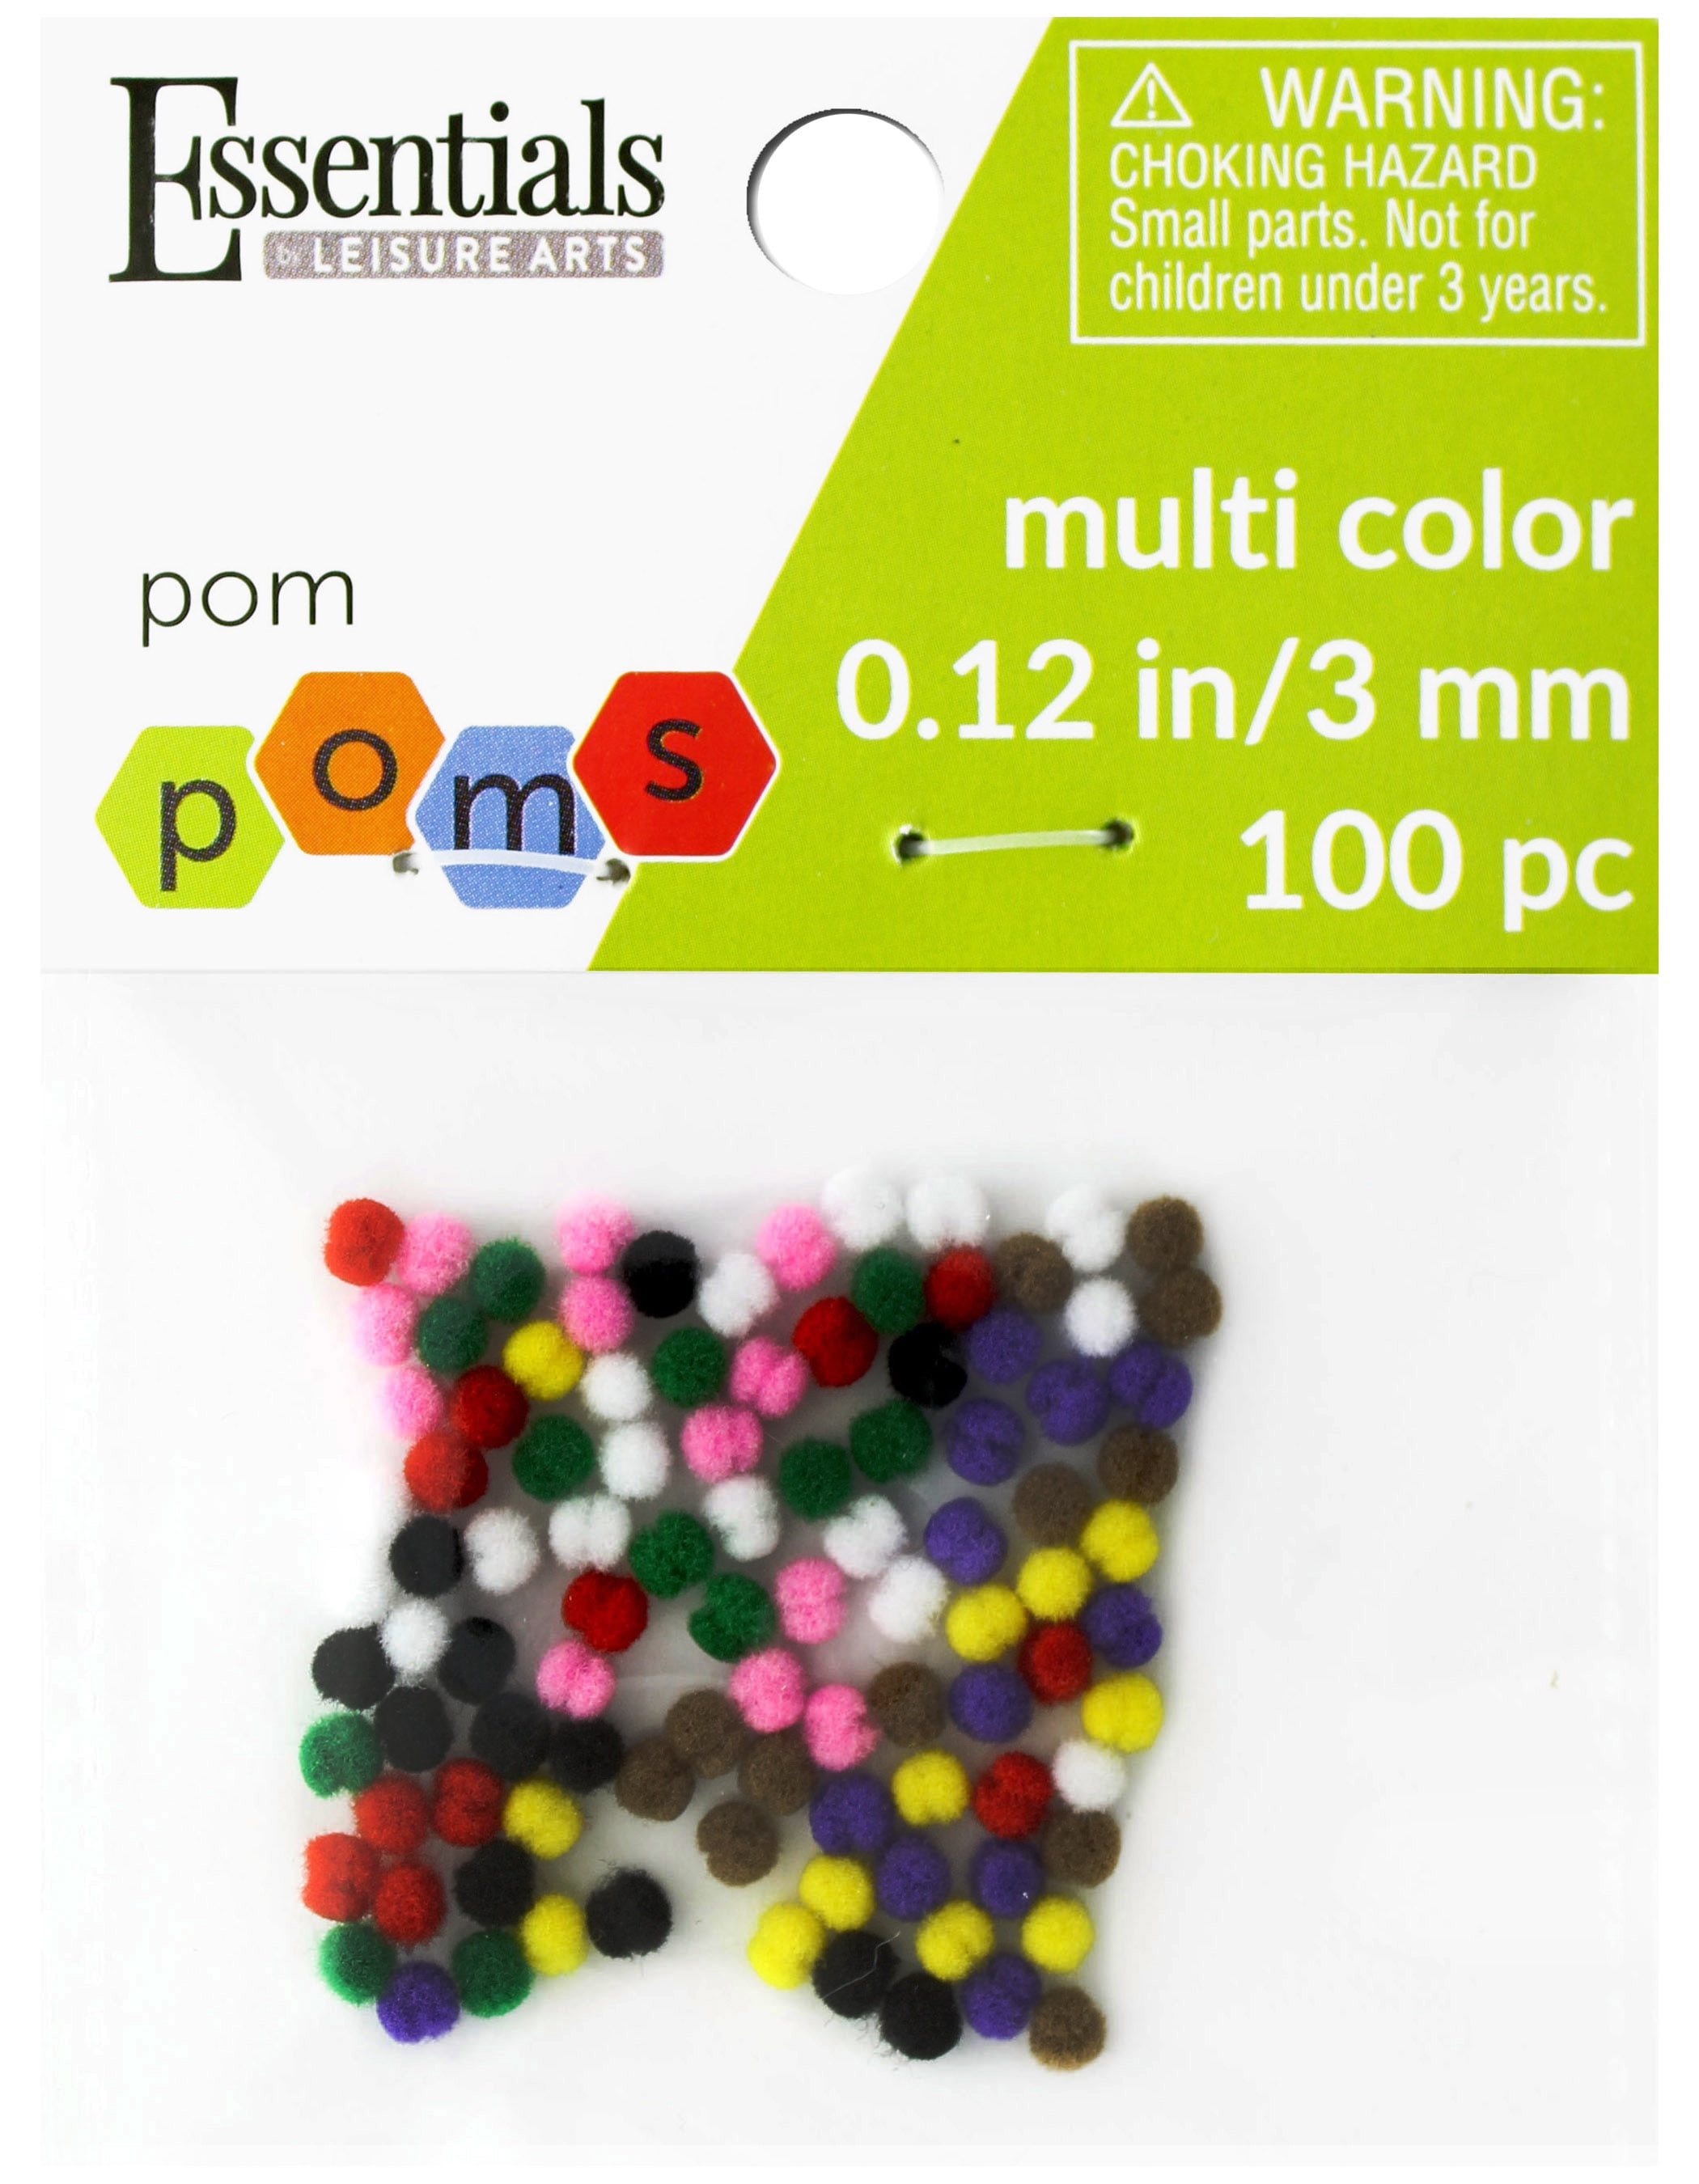 Essentials by Leisure Arts Pom Poms - Red - 3mm - 100 piece pom poms arts  and crafts - red pompoms for crafts - craft pom poms - puff balls for crafts  